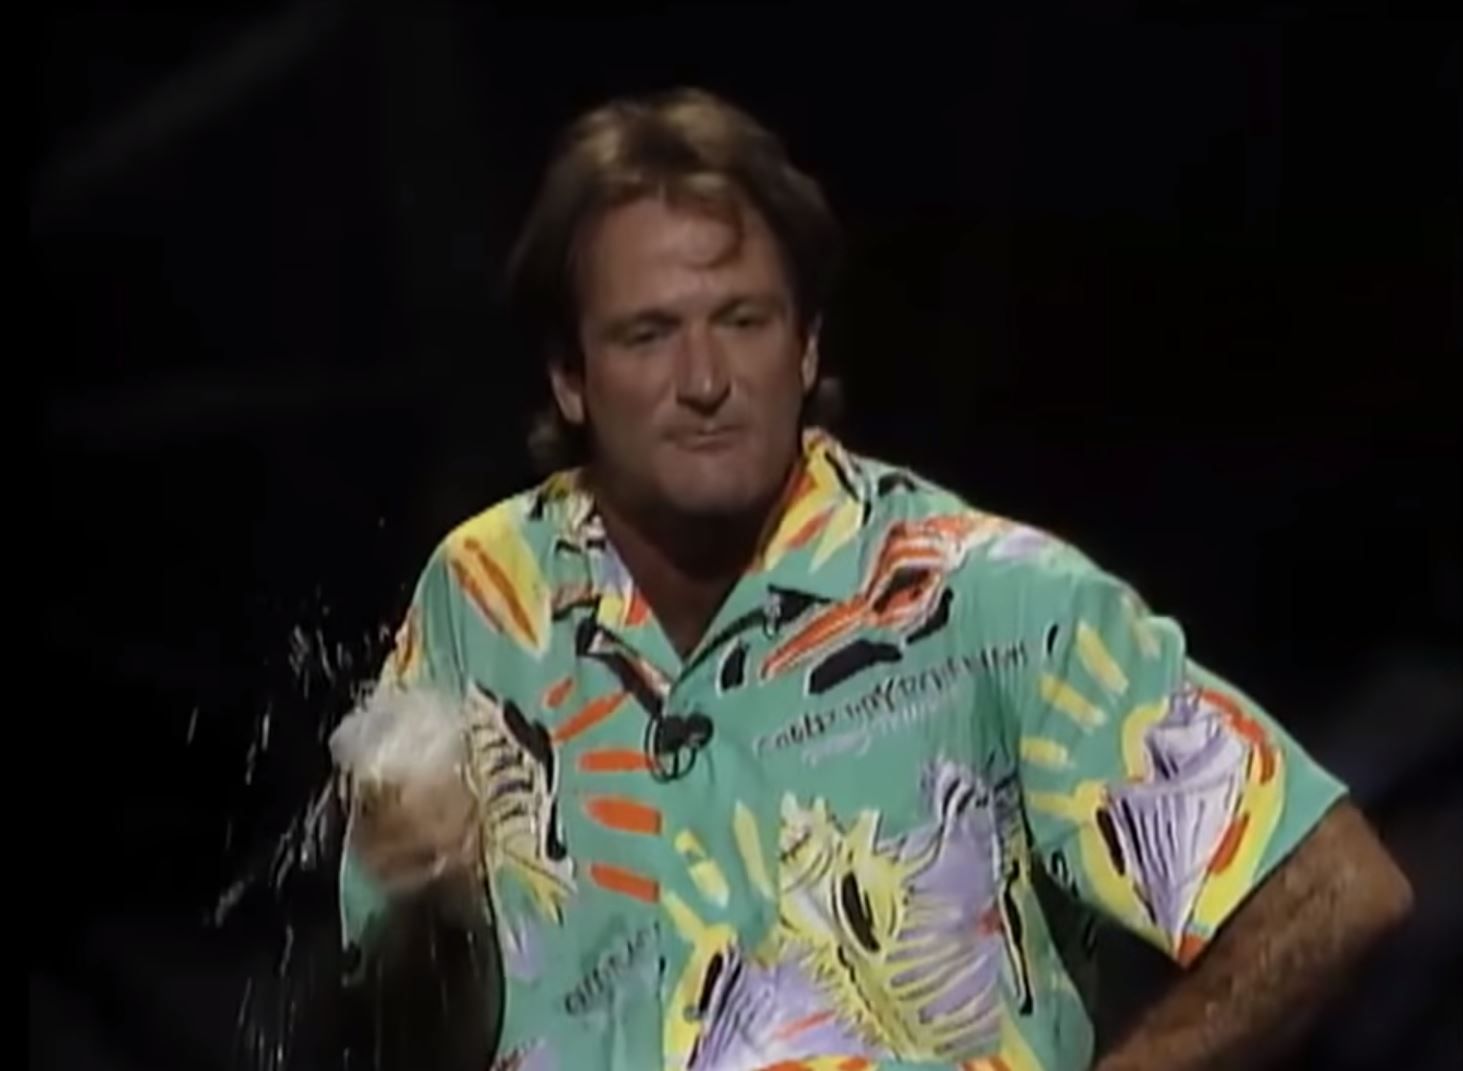 The Robin Williams Documentary Trailer Was Released And It Has Everyone Emotional